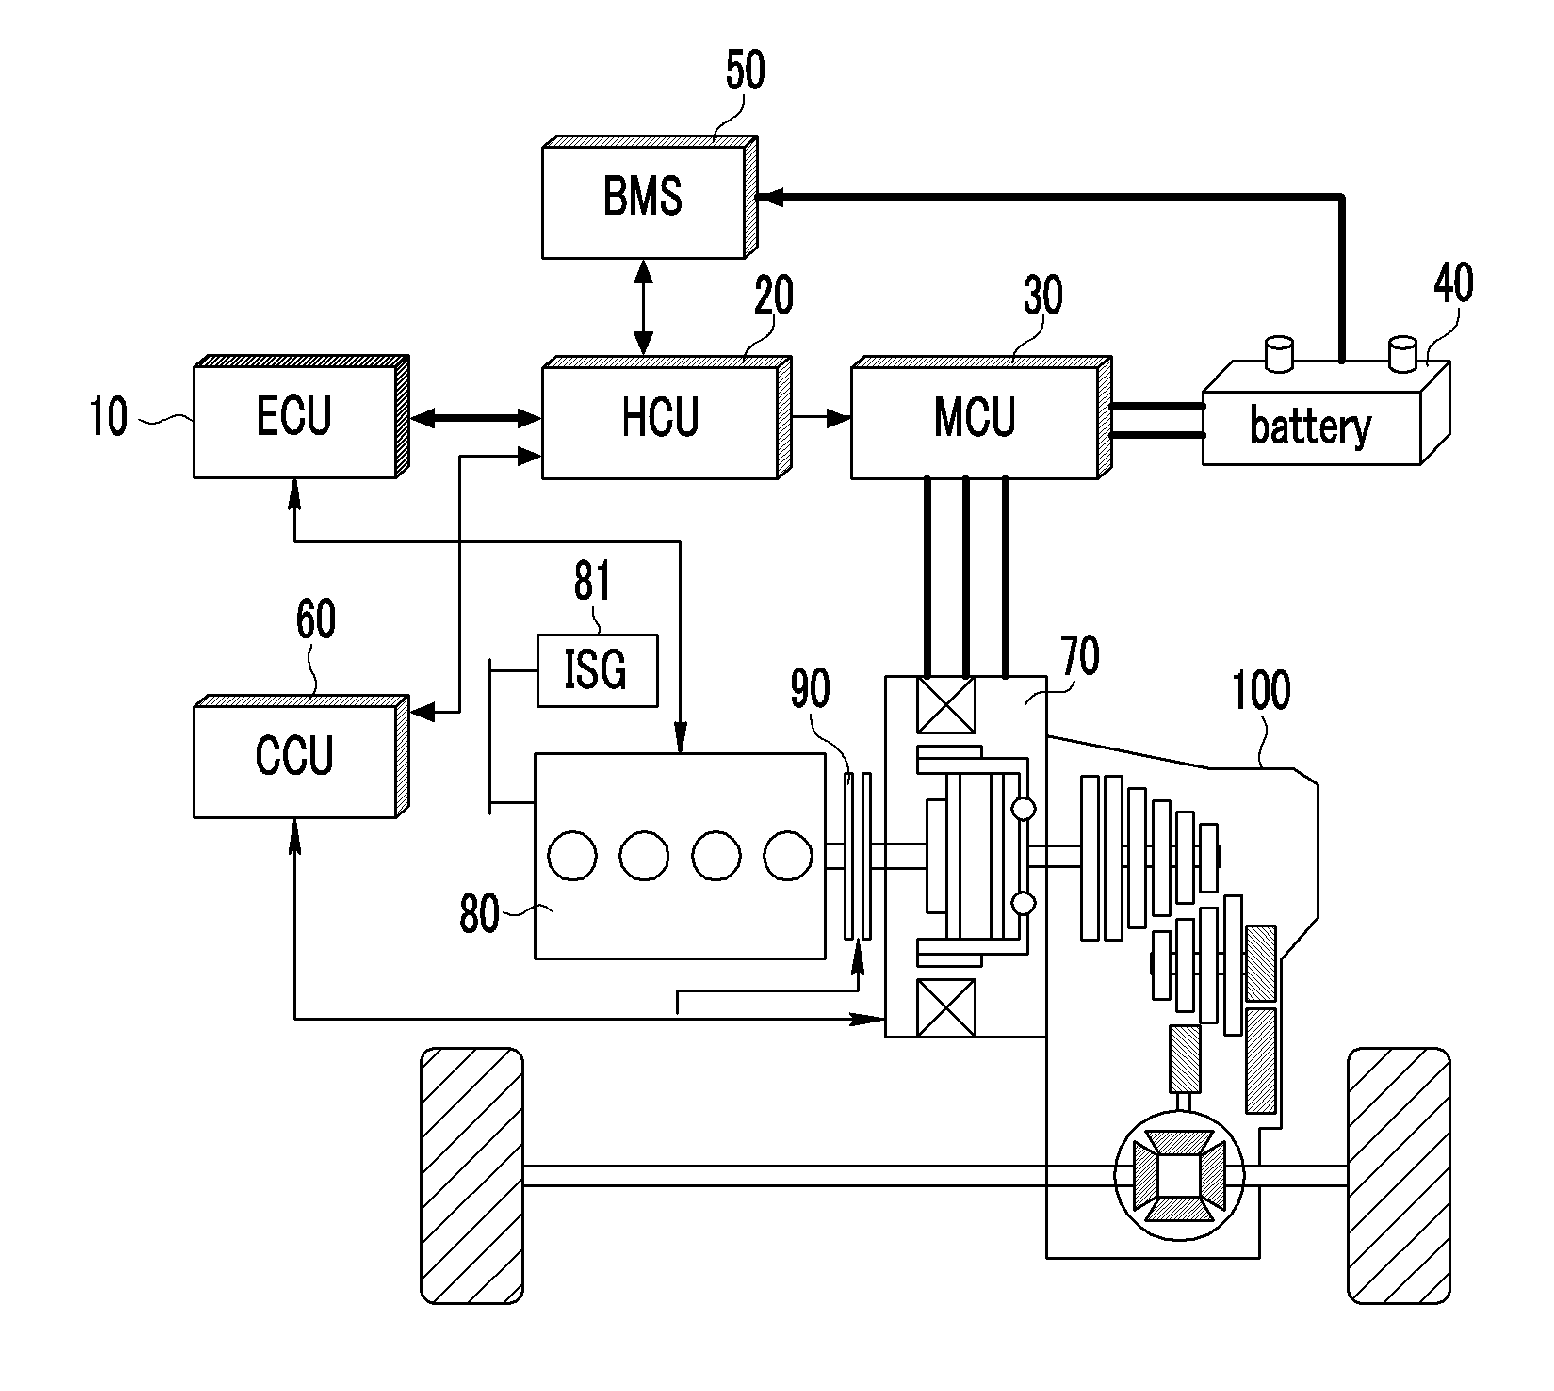 System and method for starting control of hybrid vehicle